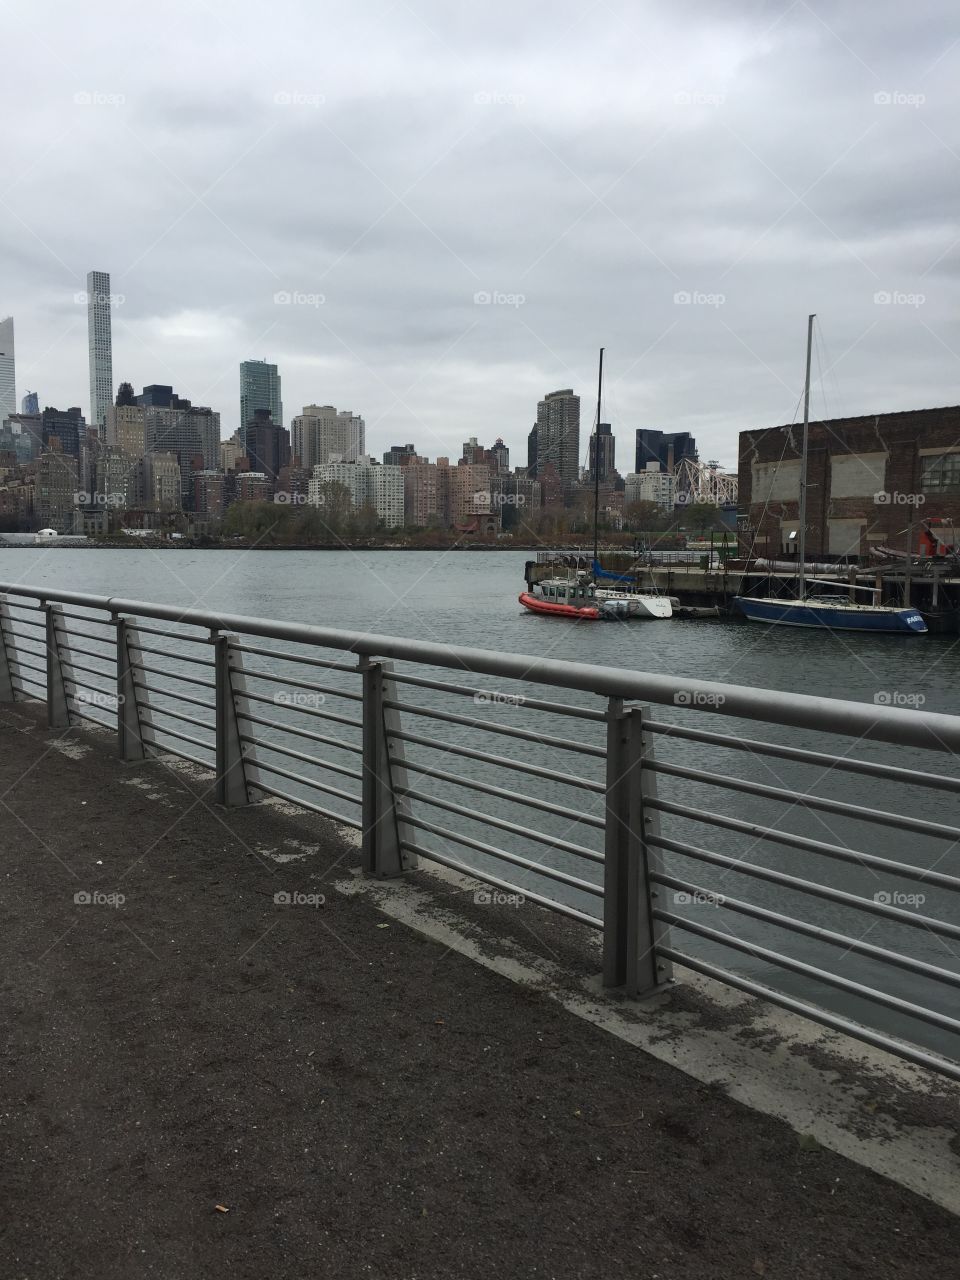 Photo of a city view taken from the boarding docks. You can see New York cities buildings and skyscrapers . Also shown is the river and finally a boat and the trail from where the photographer was standing.